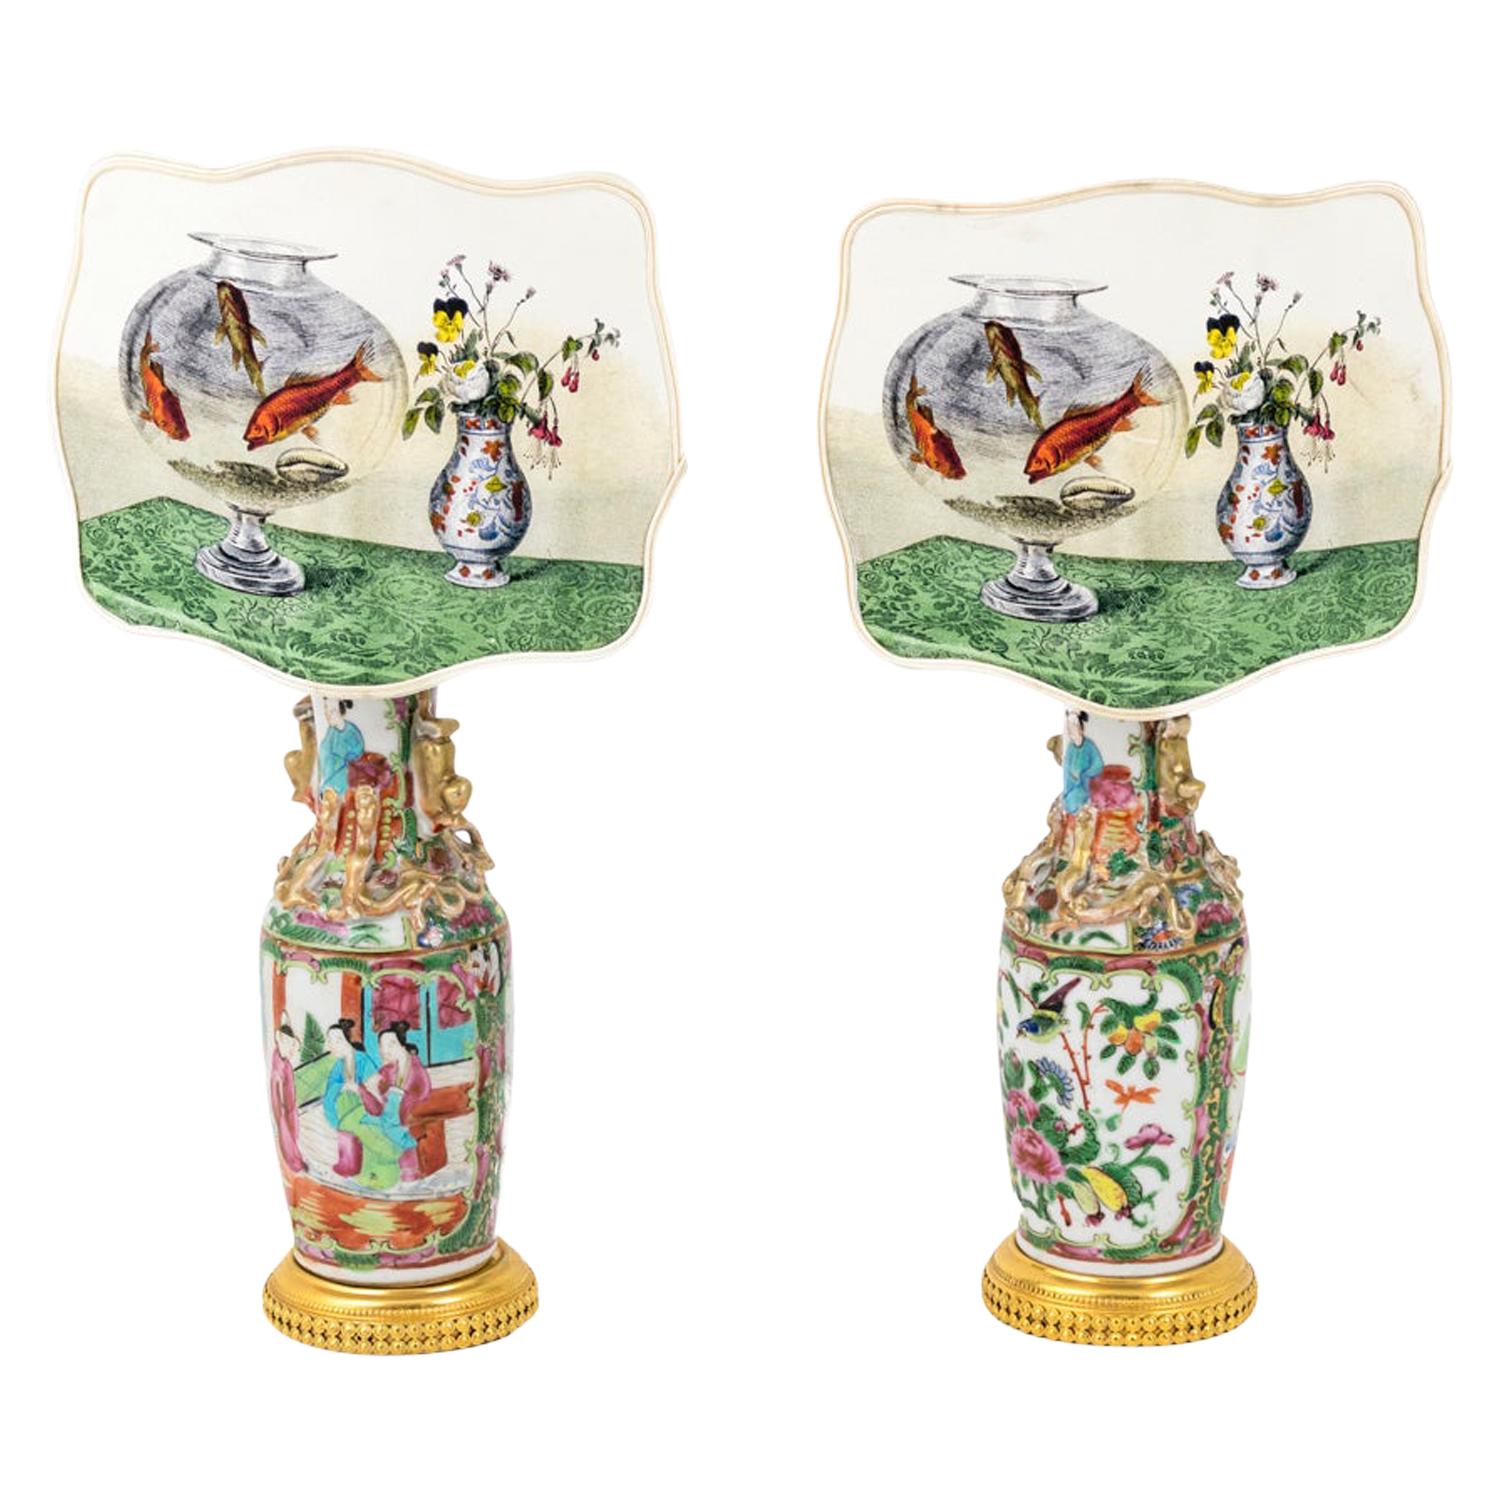 Pair of Small Canton Porcelain Lamps with Screens, circa 1880